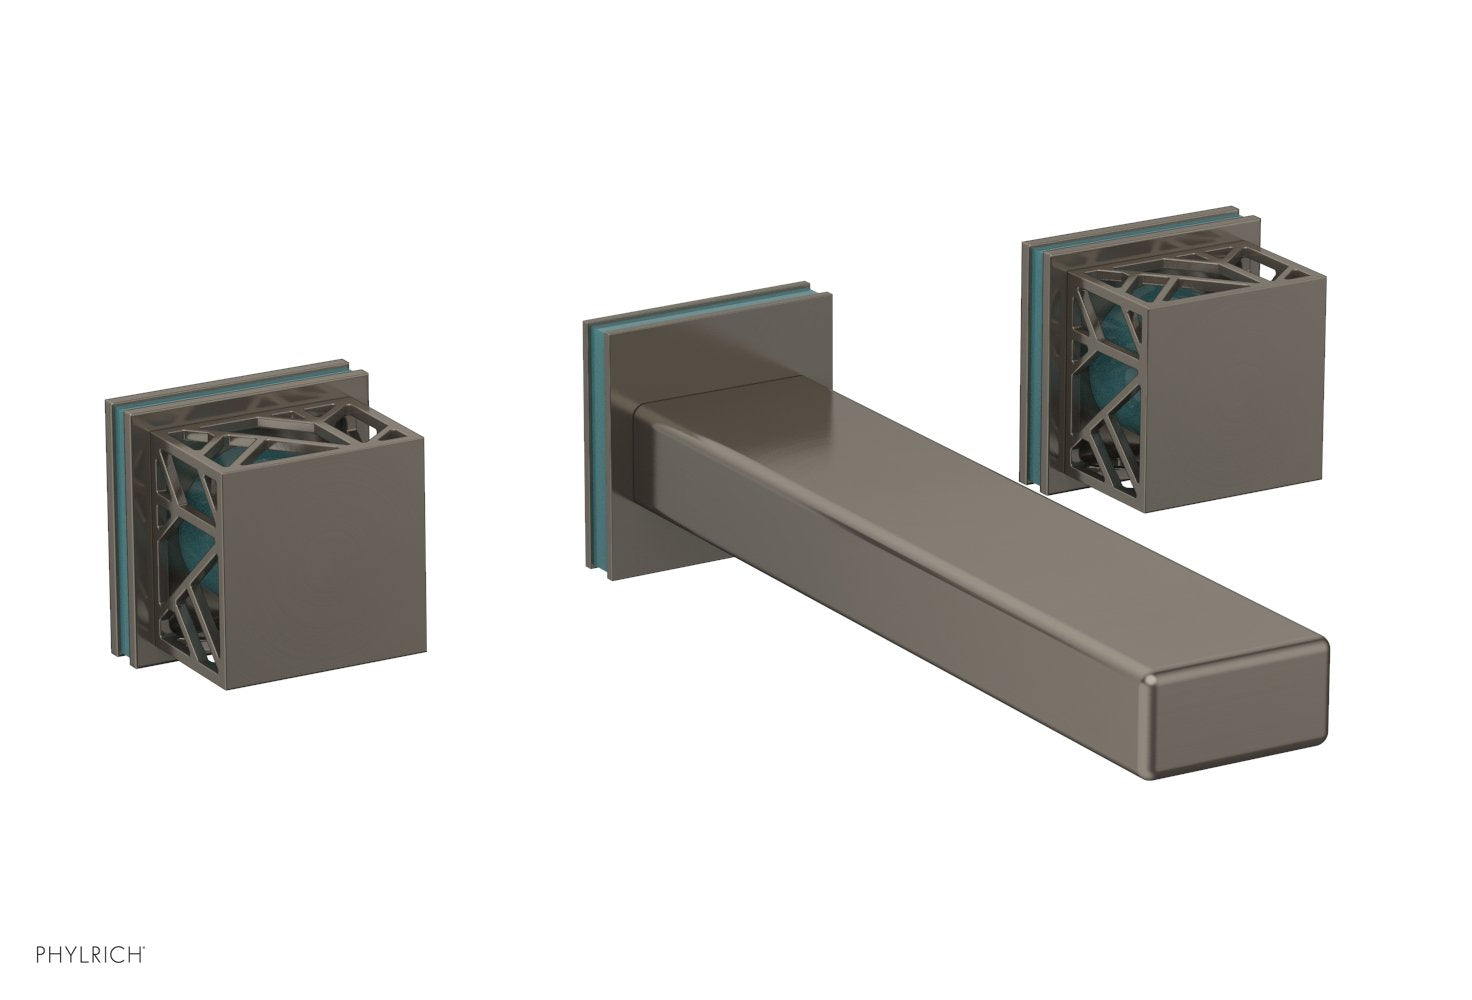 Phylrich JOLIE Wall Tub Set - Square Handles with "Turquoise" Accents